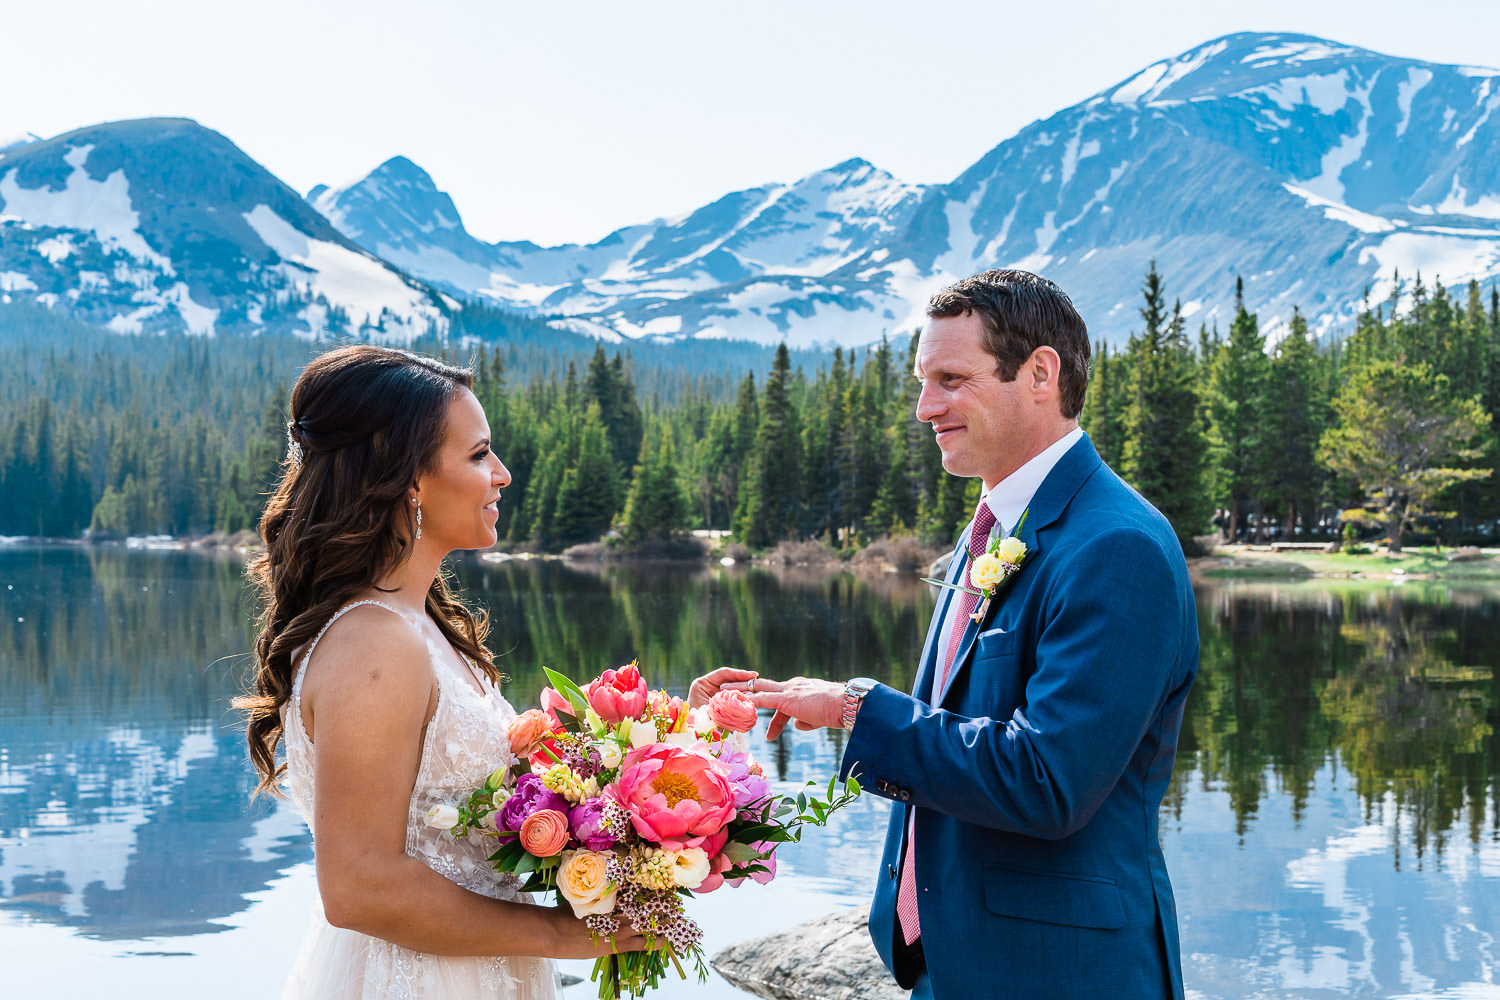 Couple elopes in front of a mountainous lake